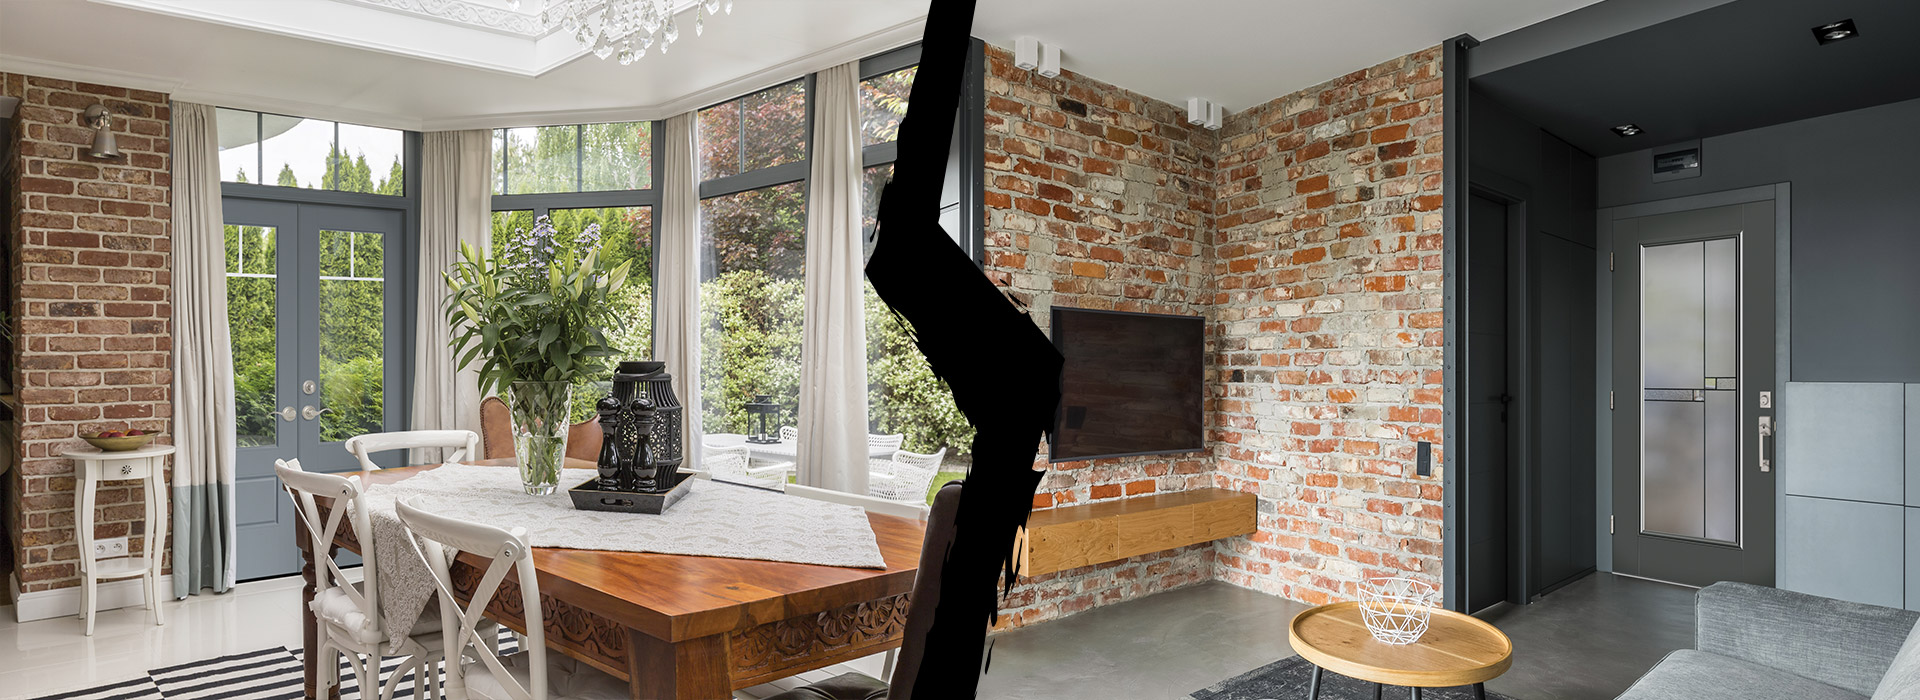 To the left is a a sun room dining area with flush glazed door and to the right is a modern entryway with a full lite glass insert door. Both pictures are separated by a wide and jagged paint-like stroke black line